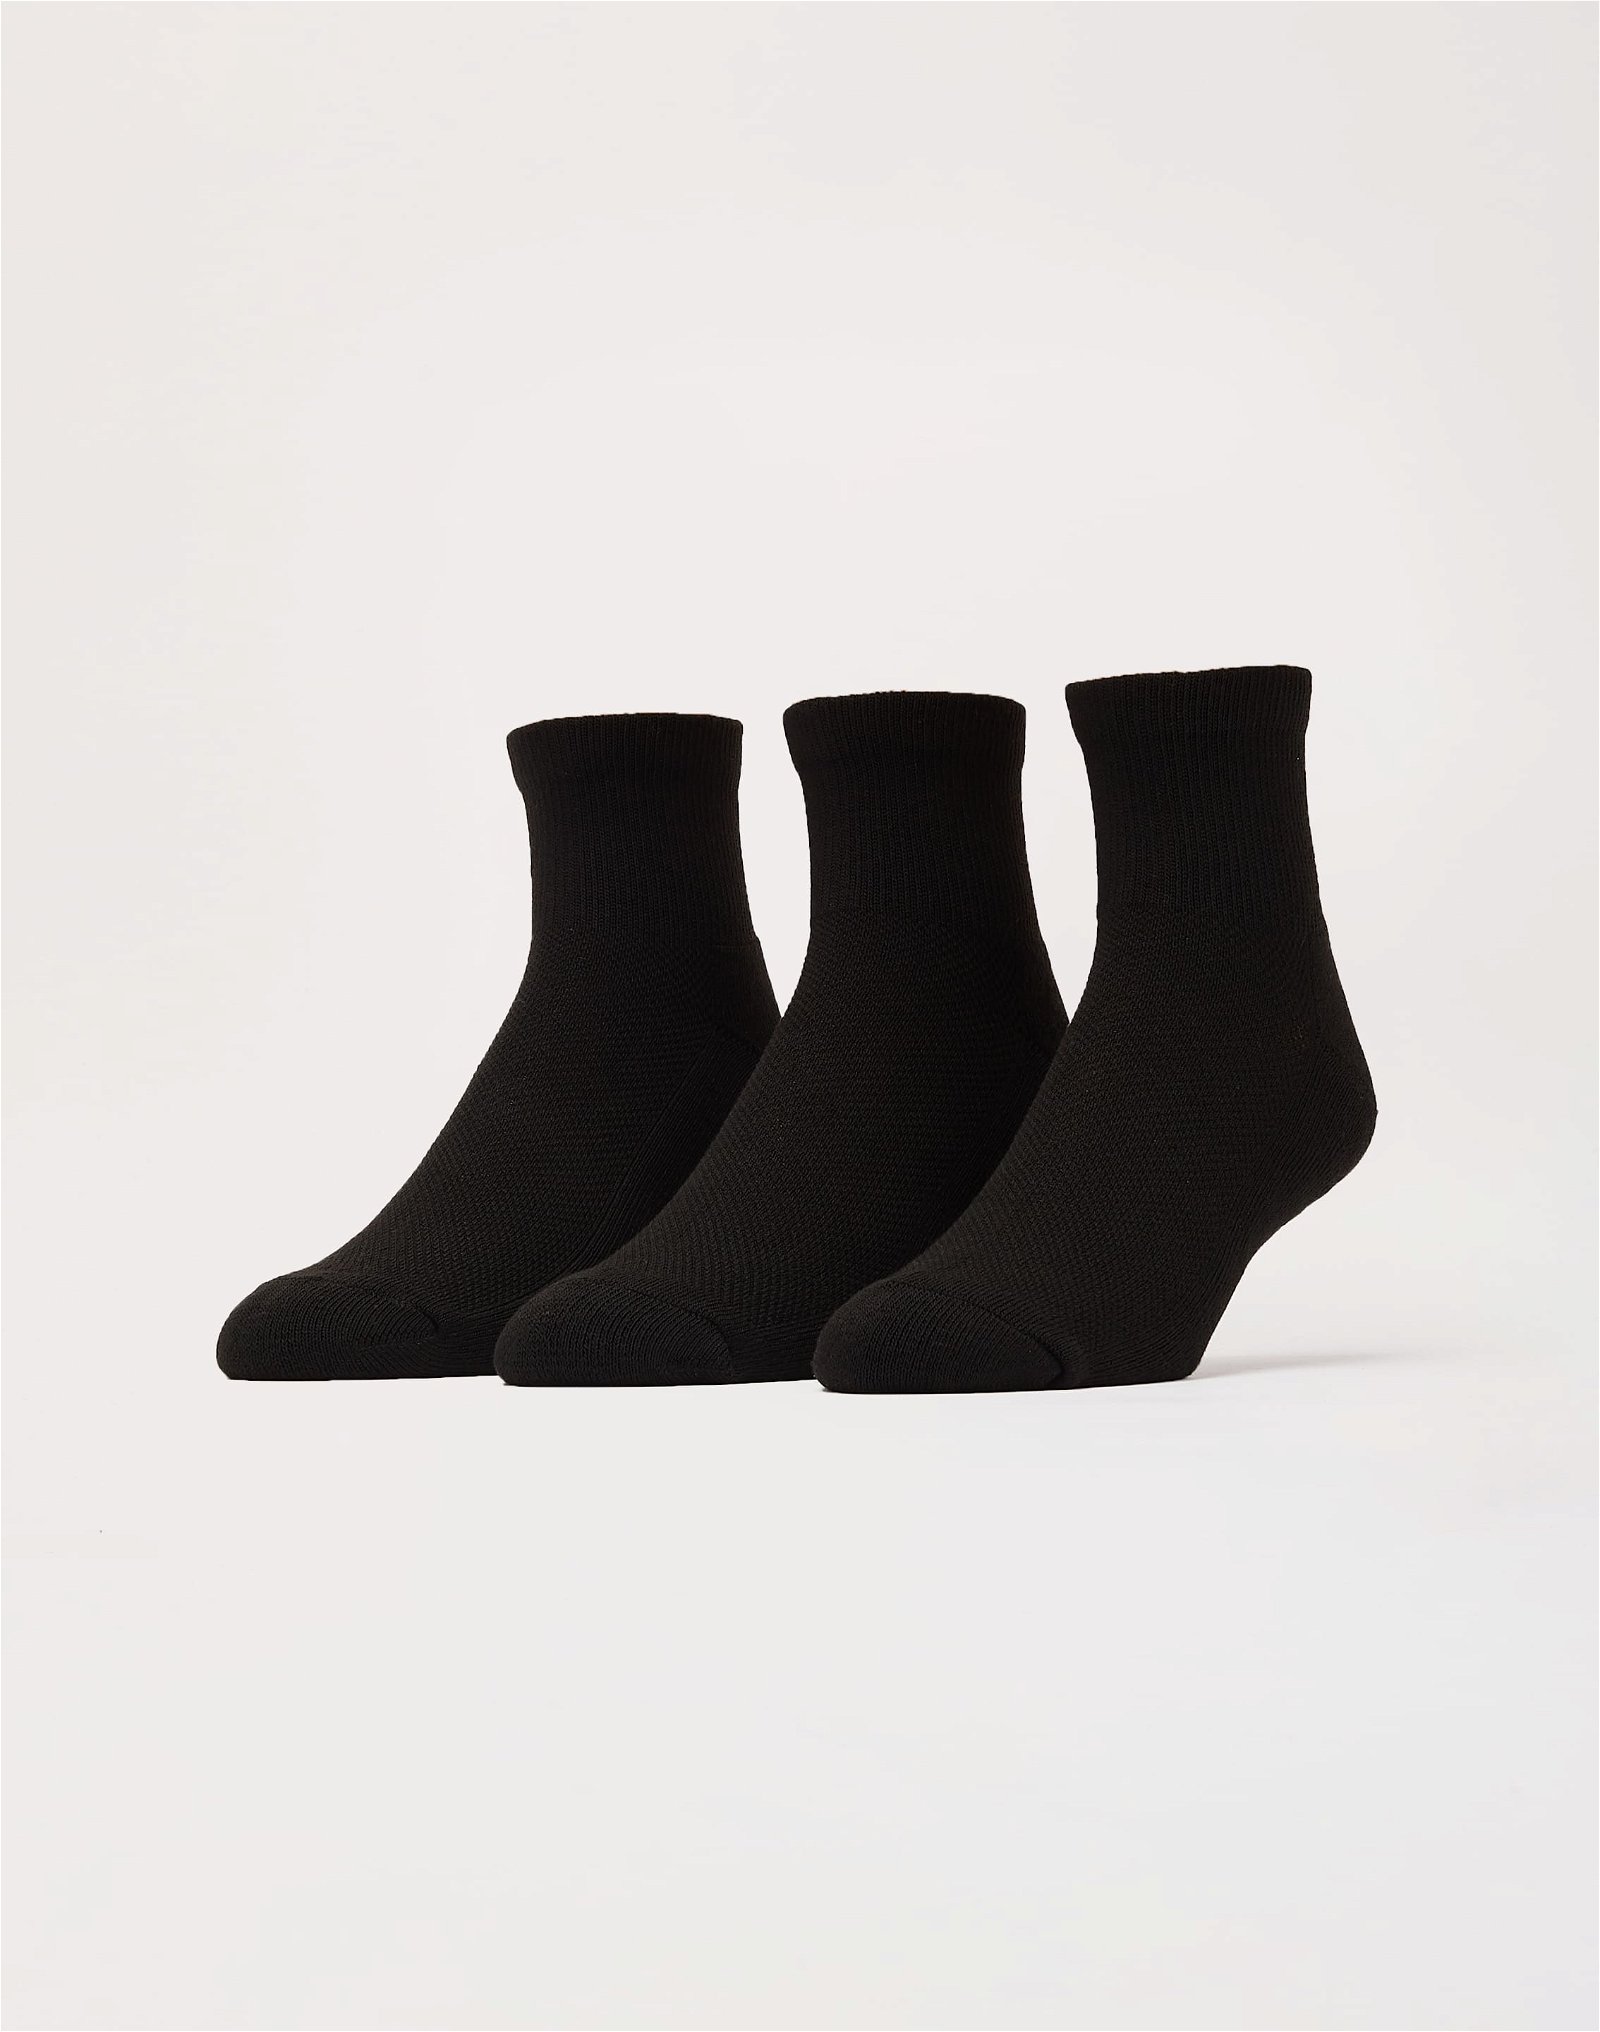 Image of Sof Sole Performance Socks 3-Pack